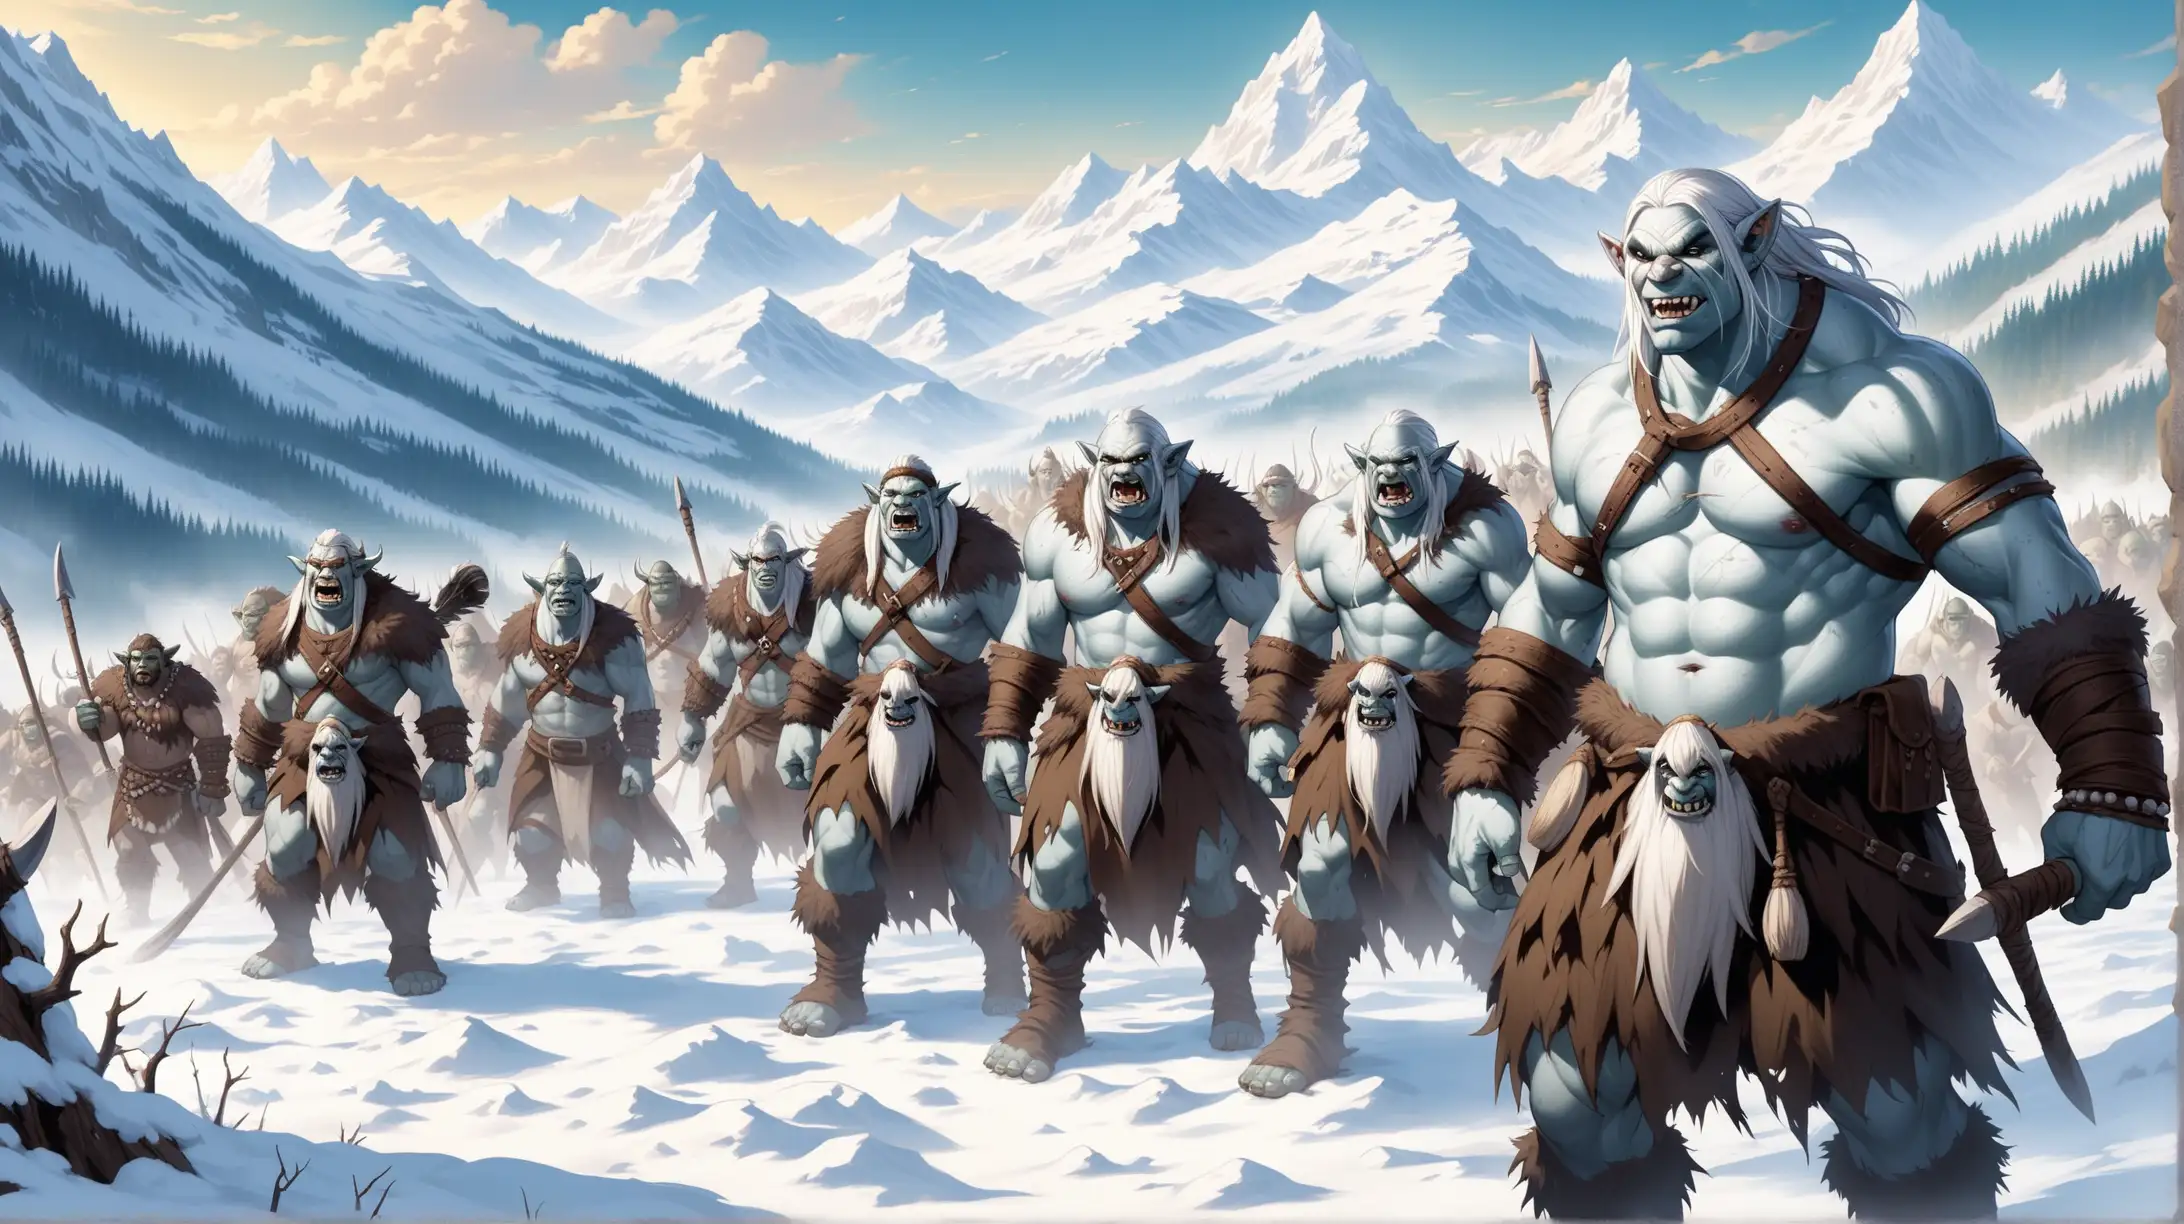 Snow White Orc Tribe Medieval Fantasy Barbarians and Shamans